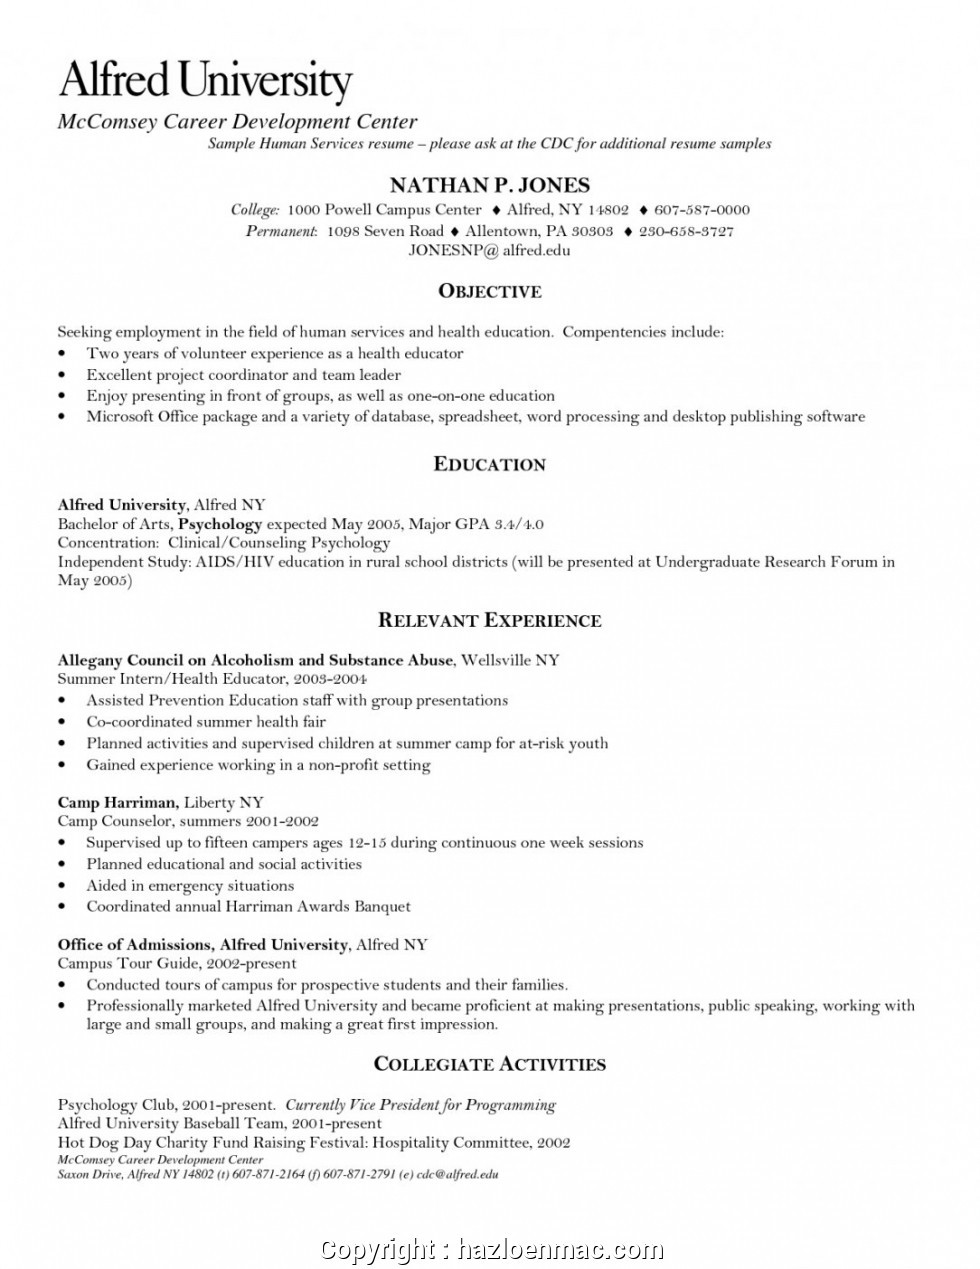 Sample Resume Objectives for Human Services Human Services Resume Objective Examples – Derel